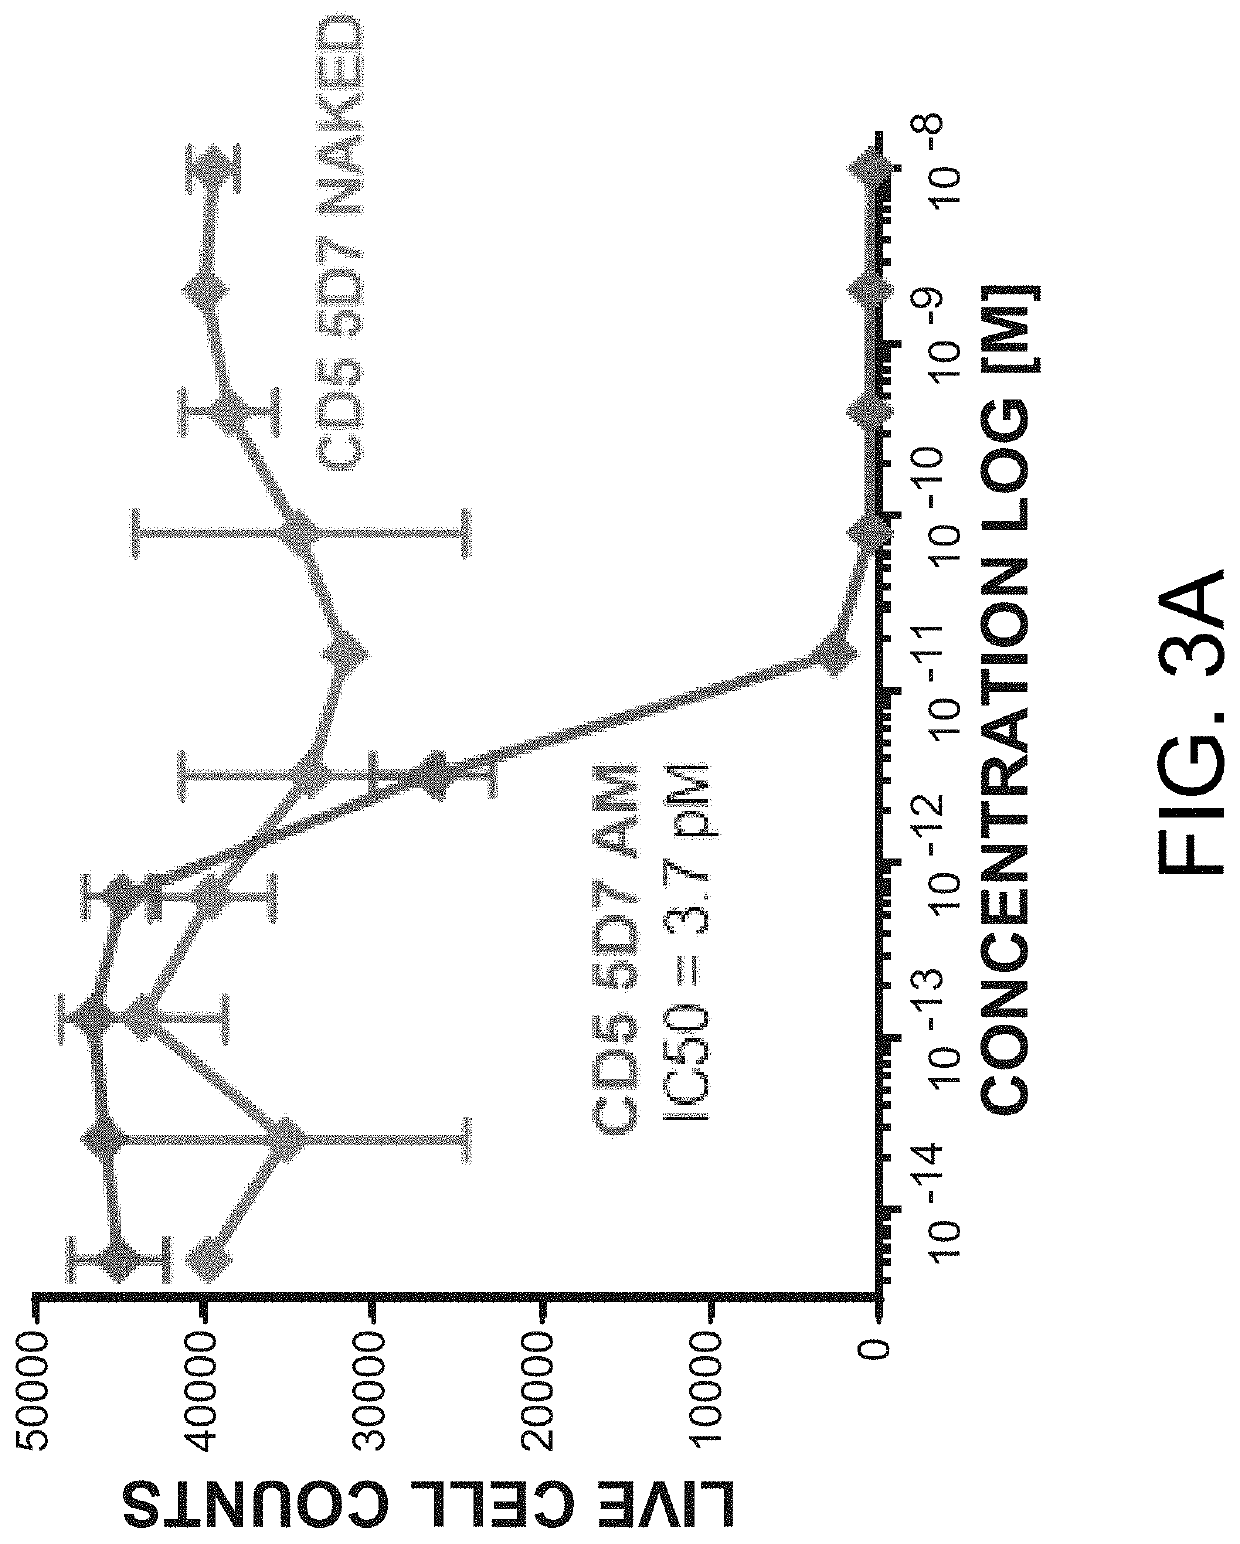 Compositions and methods for the depletion of cd5+ cells